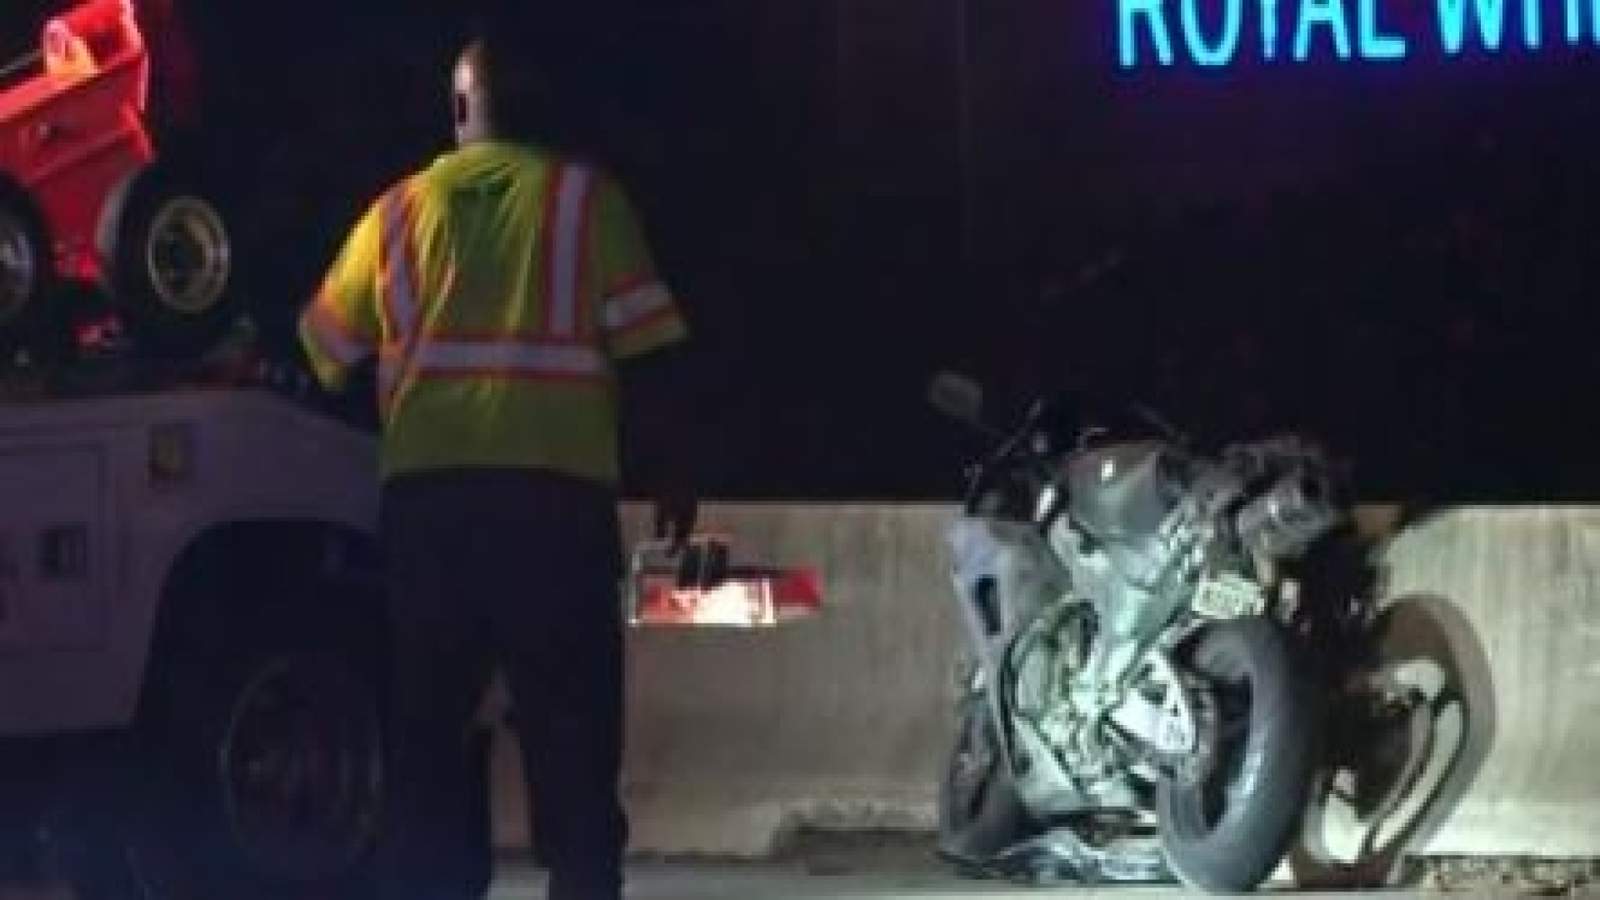 Motorcyclist survives being dragged half a mile down East Freeway after crash: Police